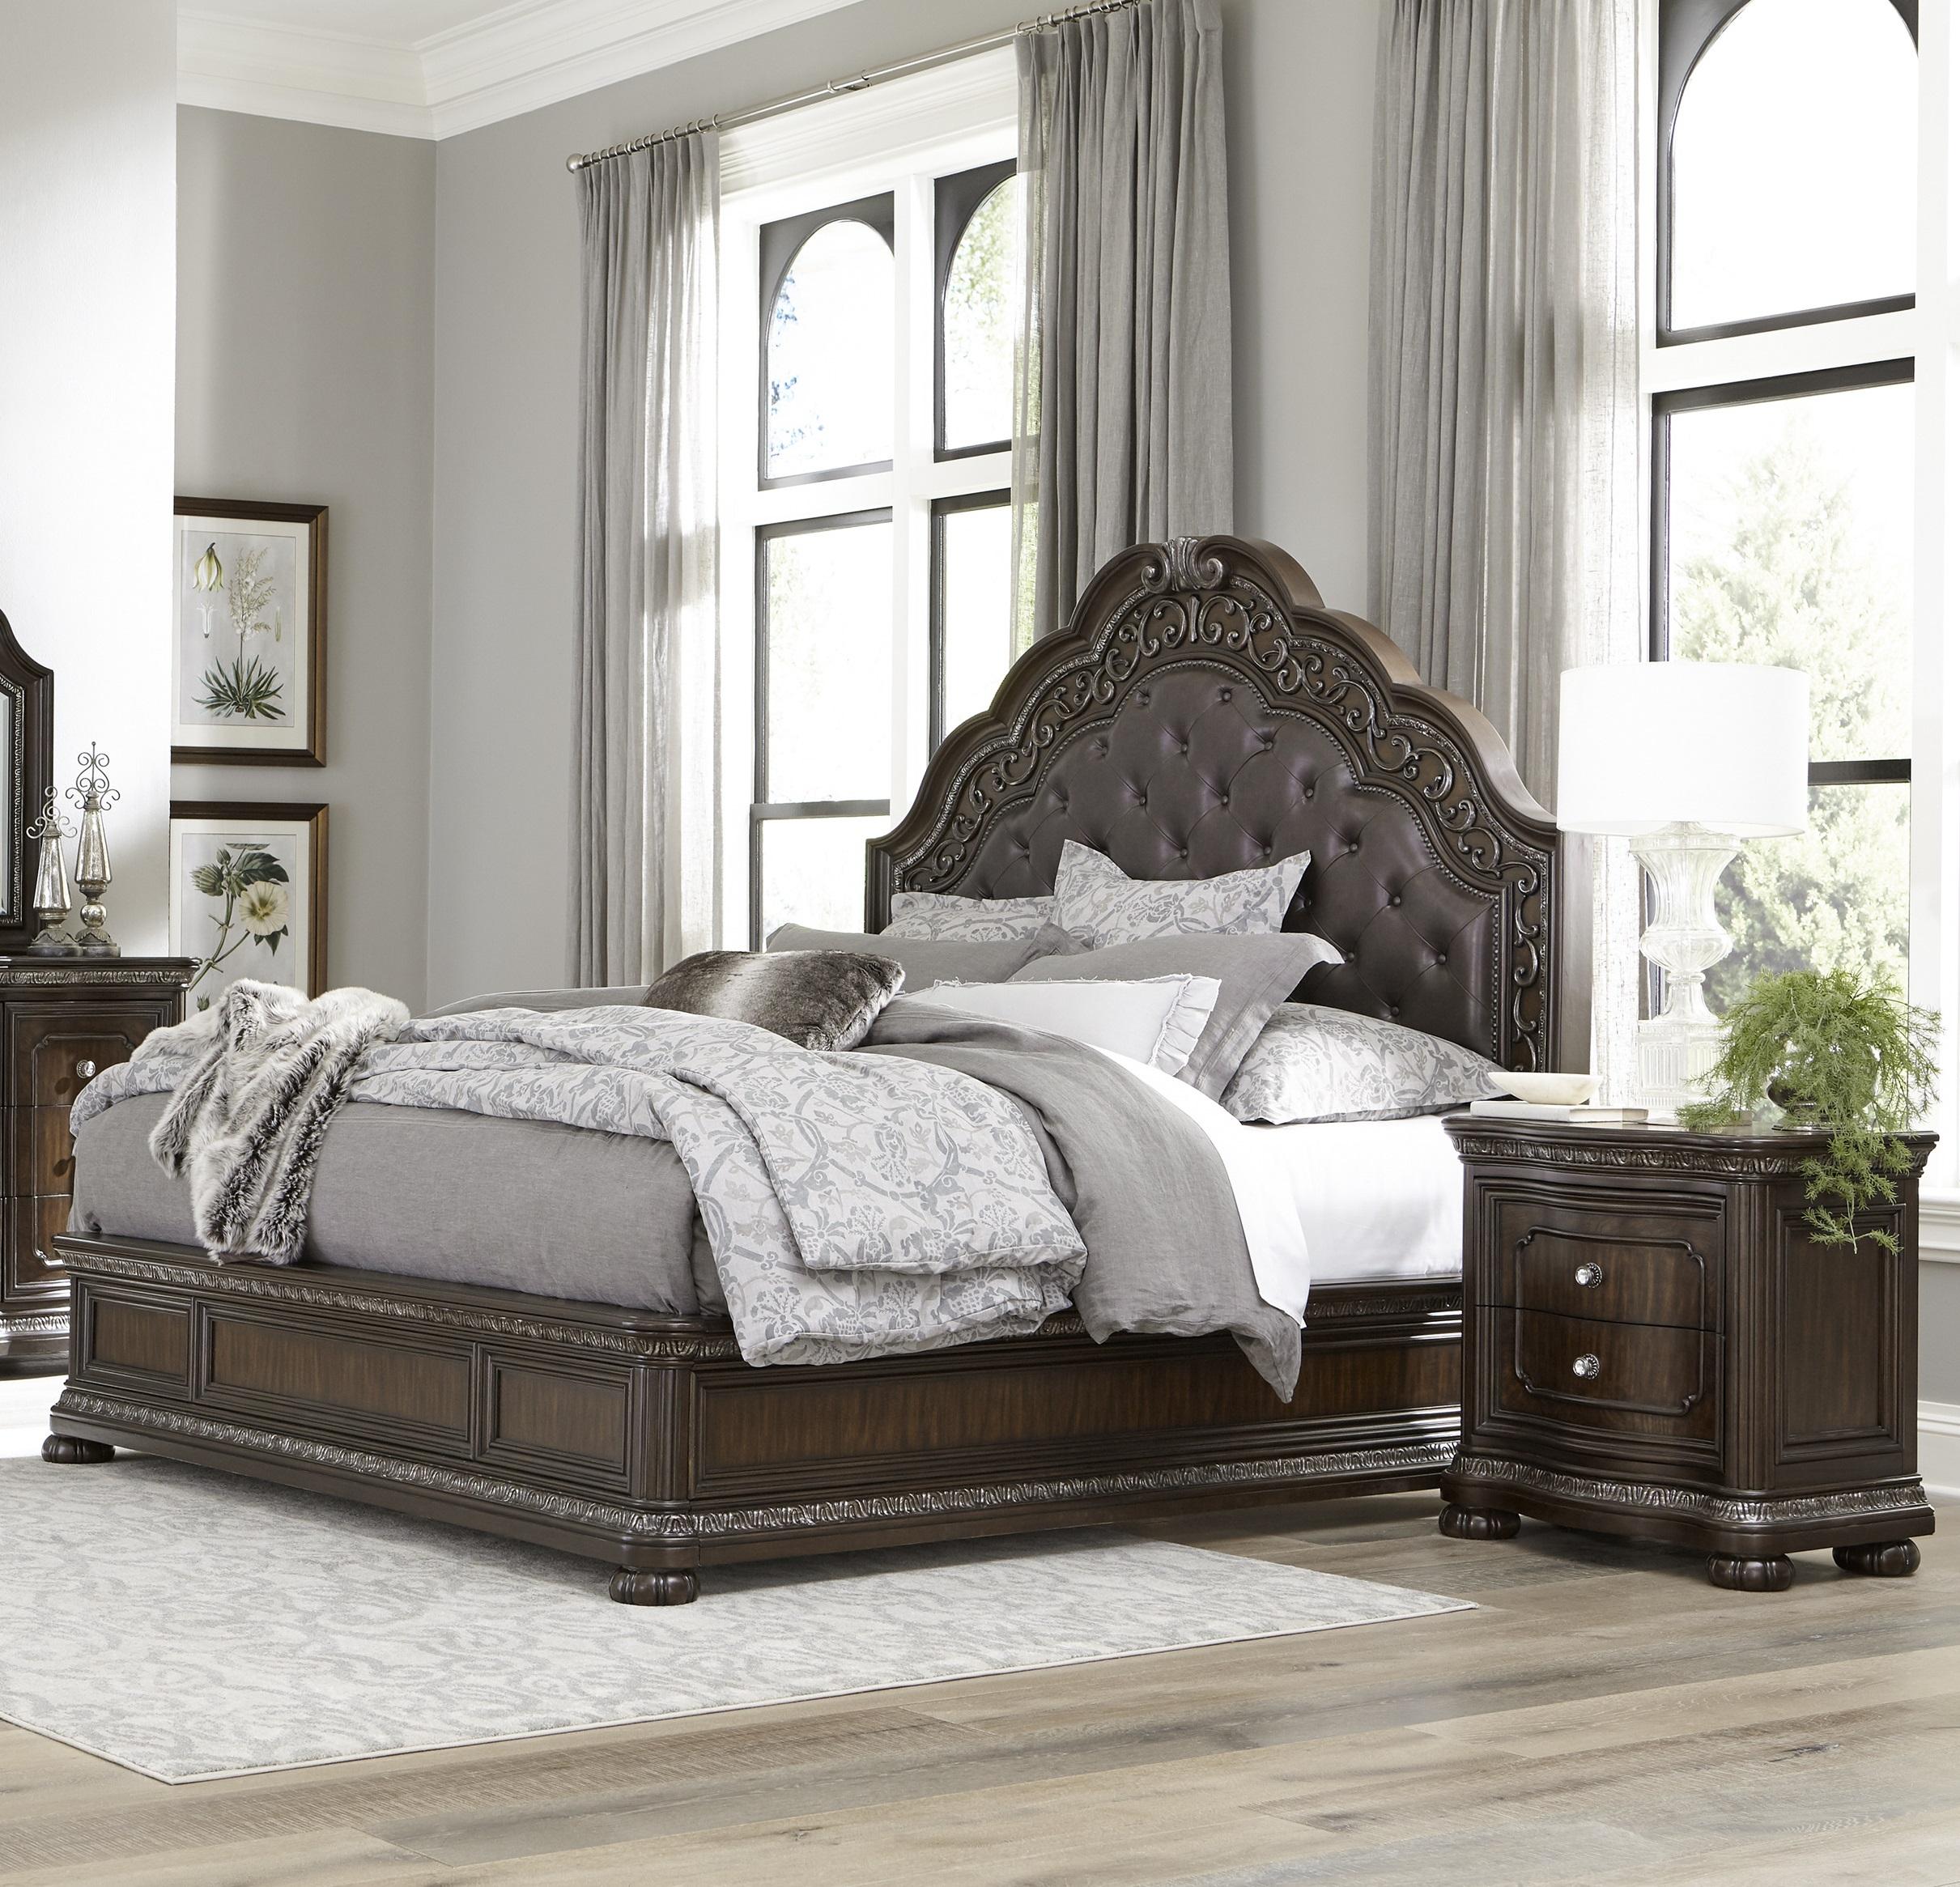 Traditional Bed and 2 Nightstands Set 1407-1*-3PC Beddington 1407-1*-3PC in Dark Cherry 